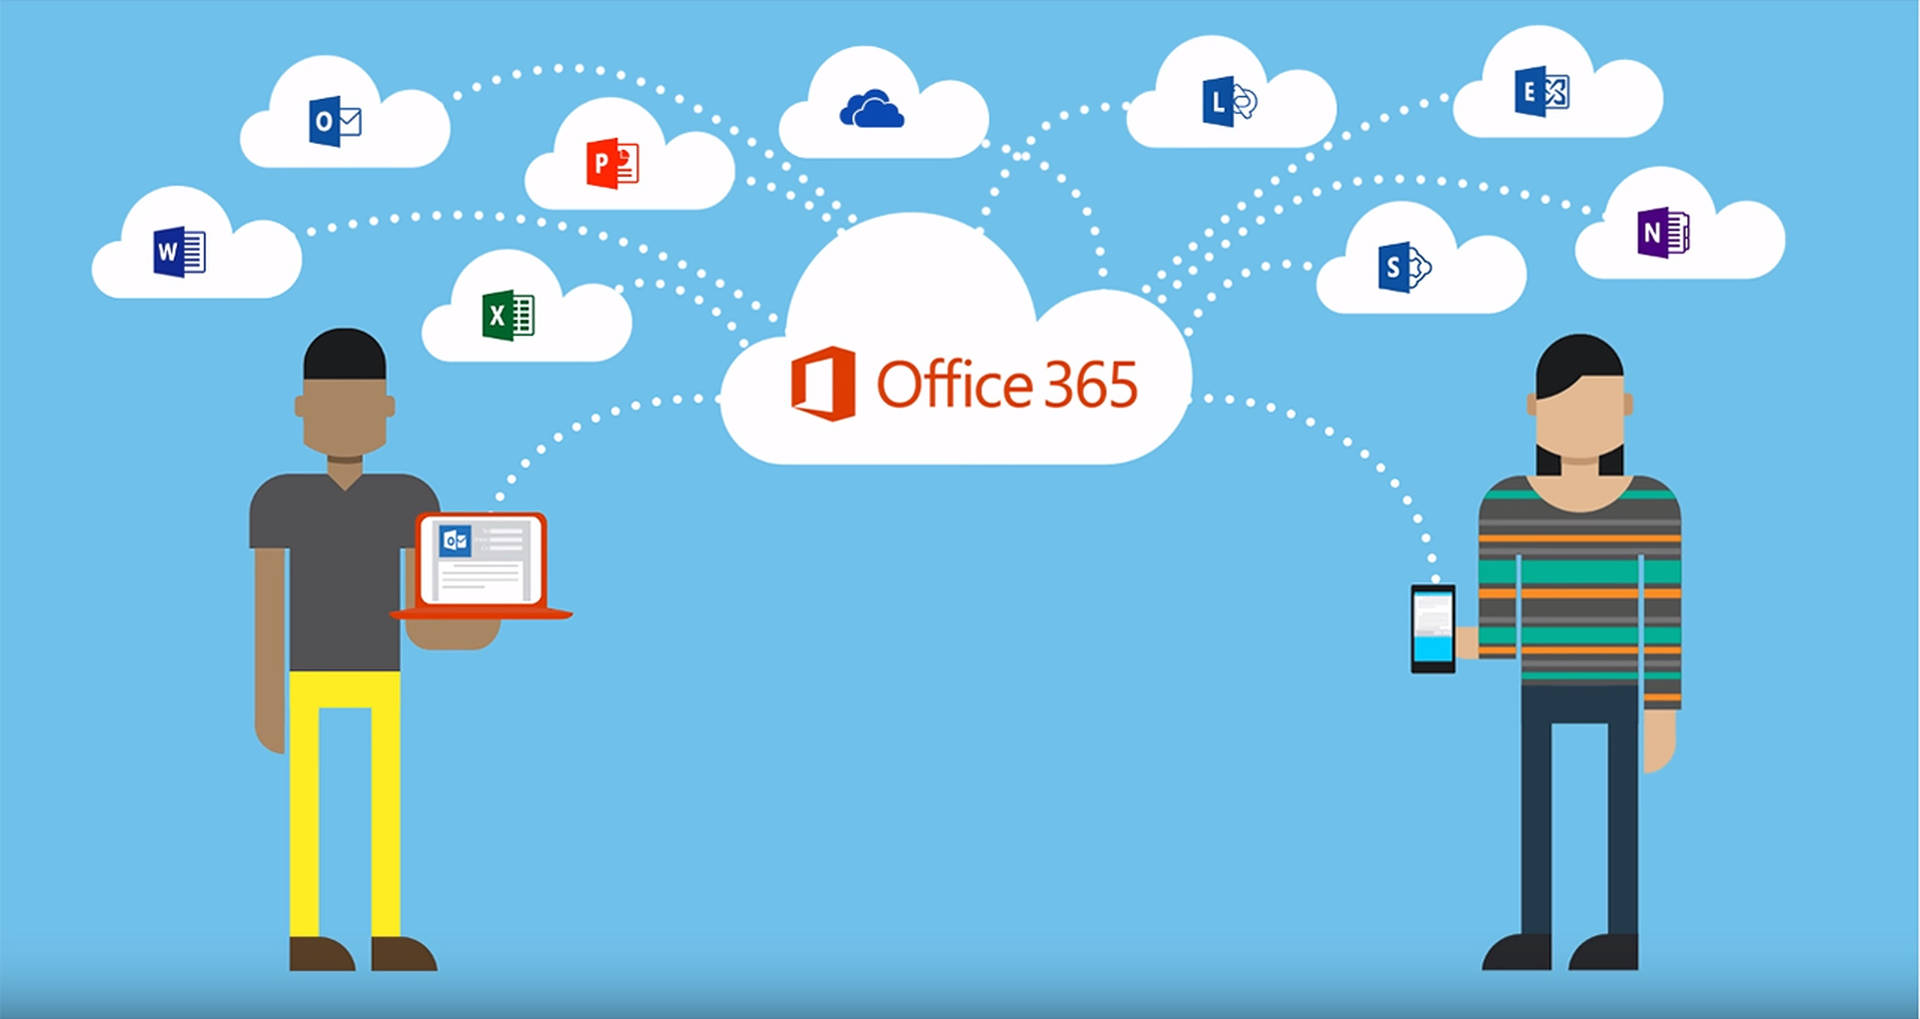 Office 365 Connection Wallpaper